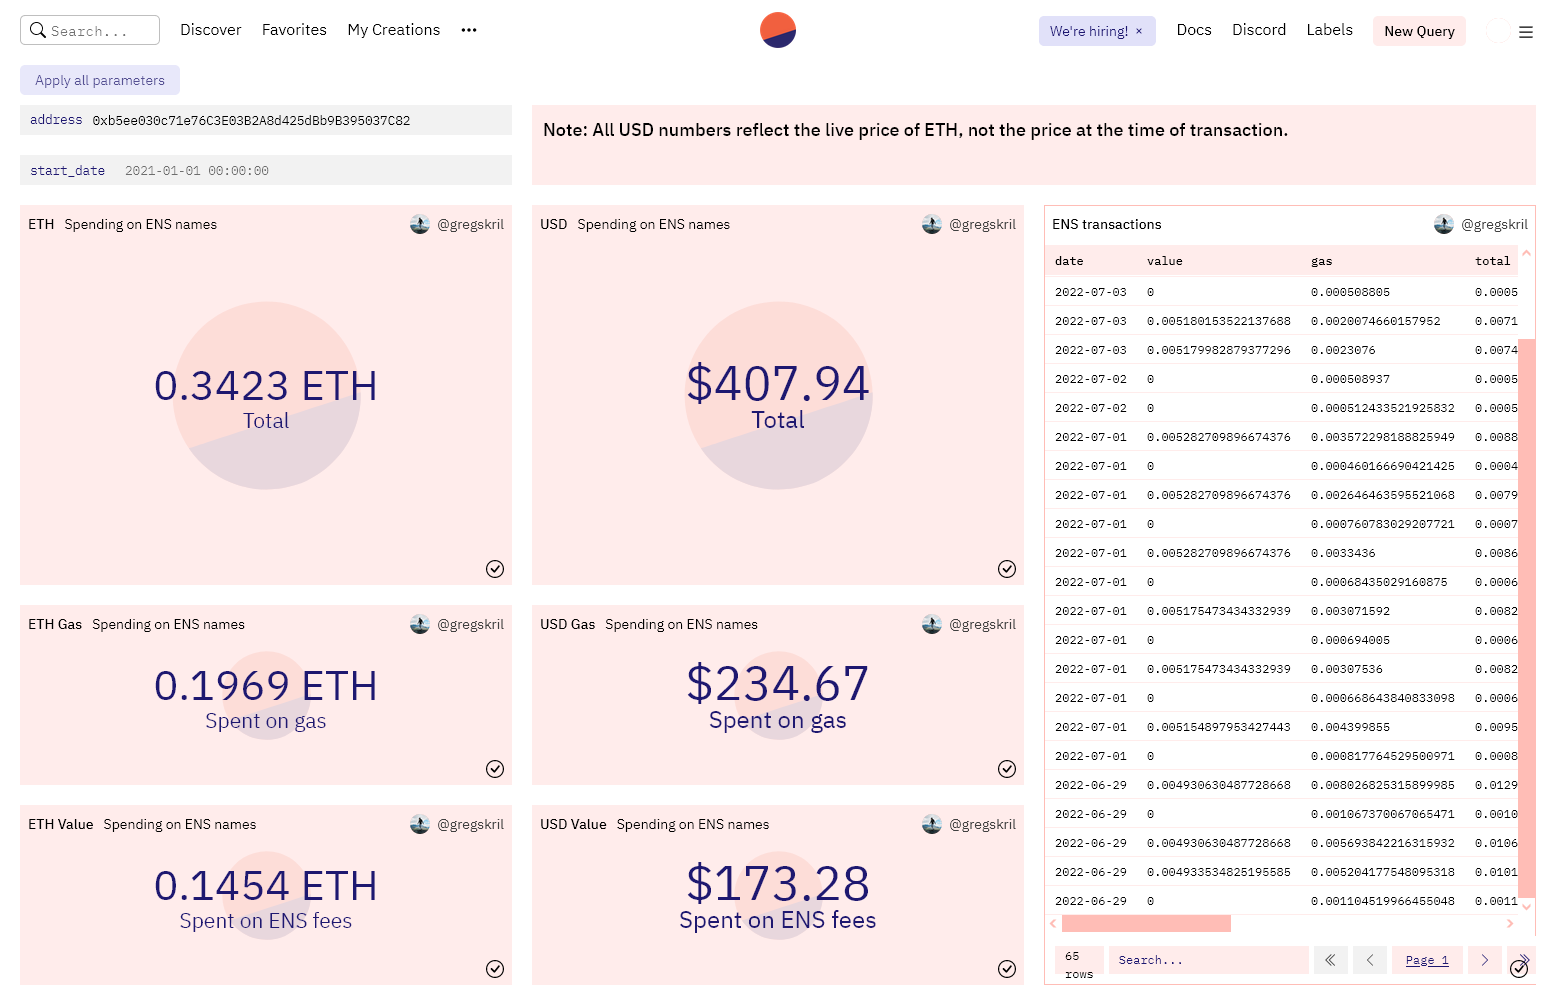 Screenshot of ENS spending by the fund's ETH wallet